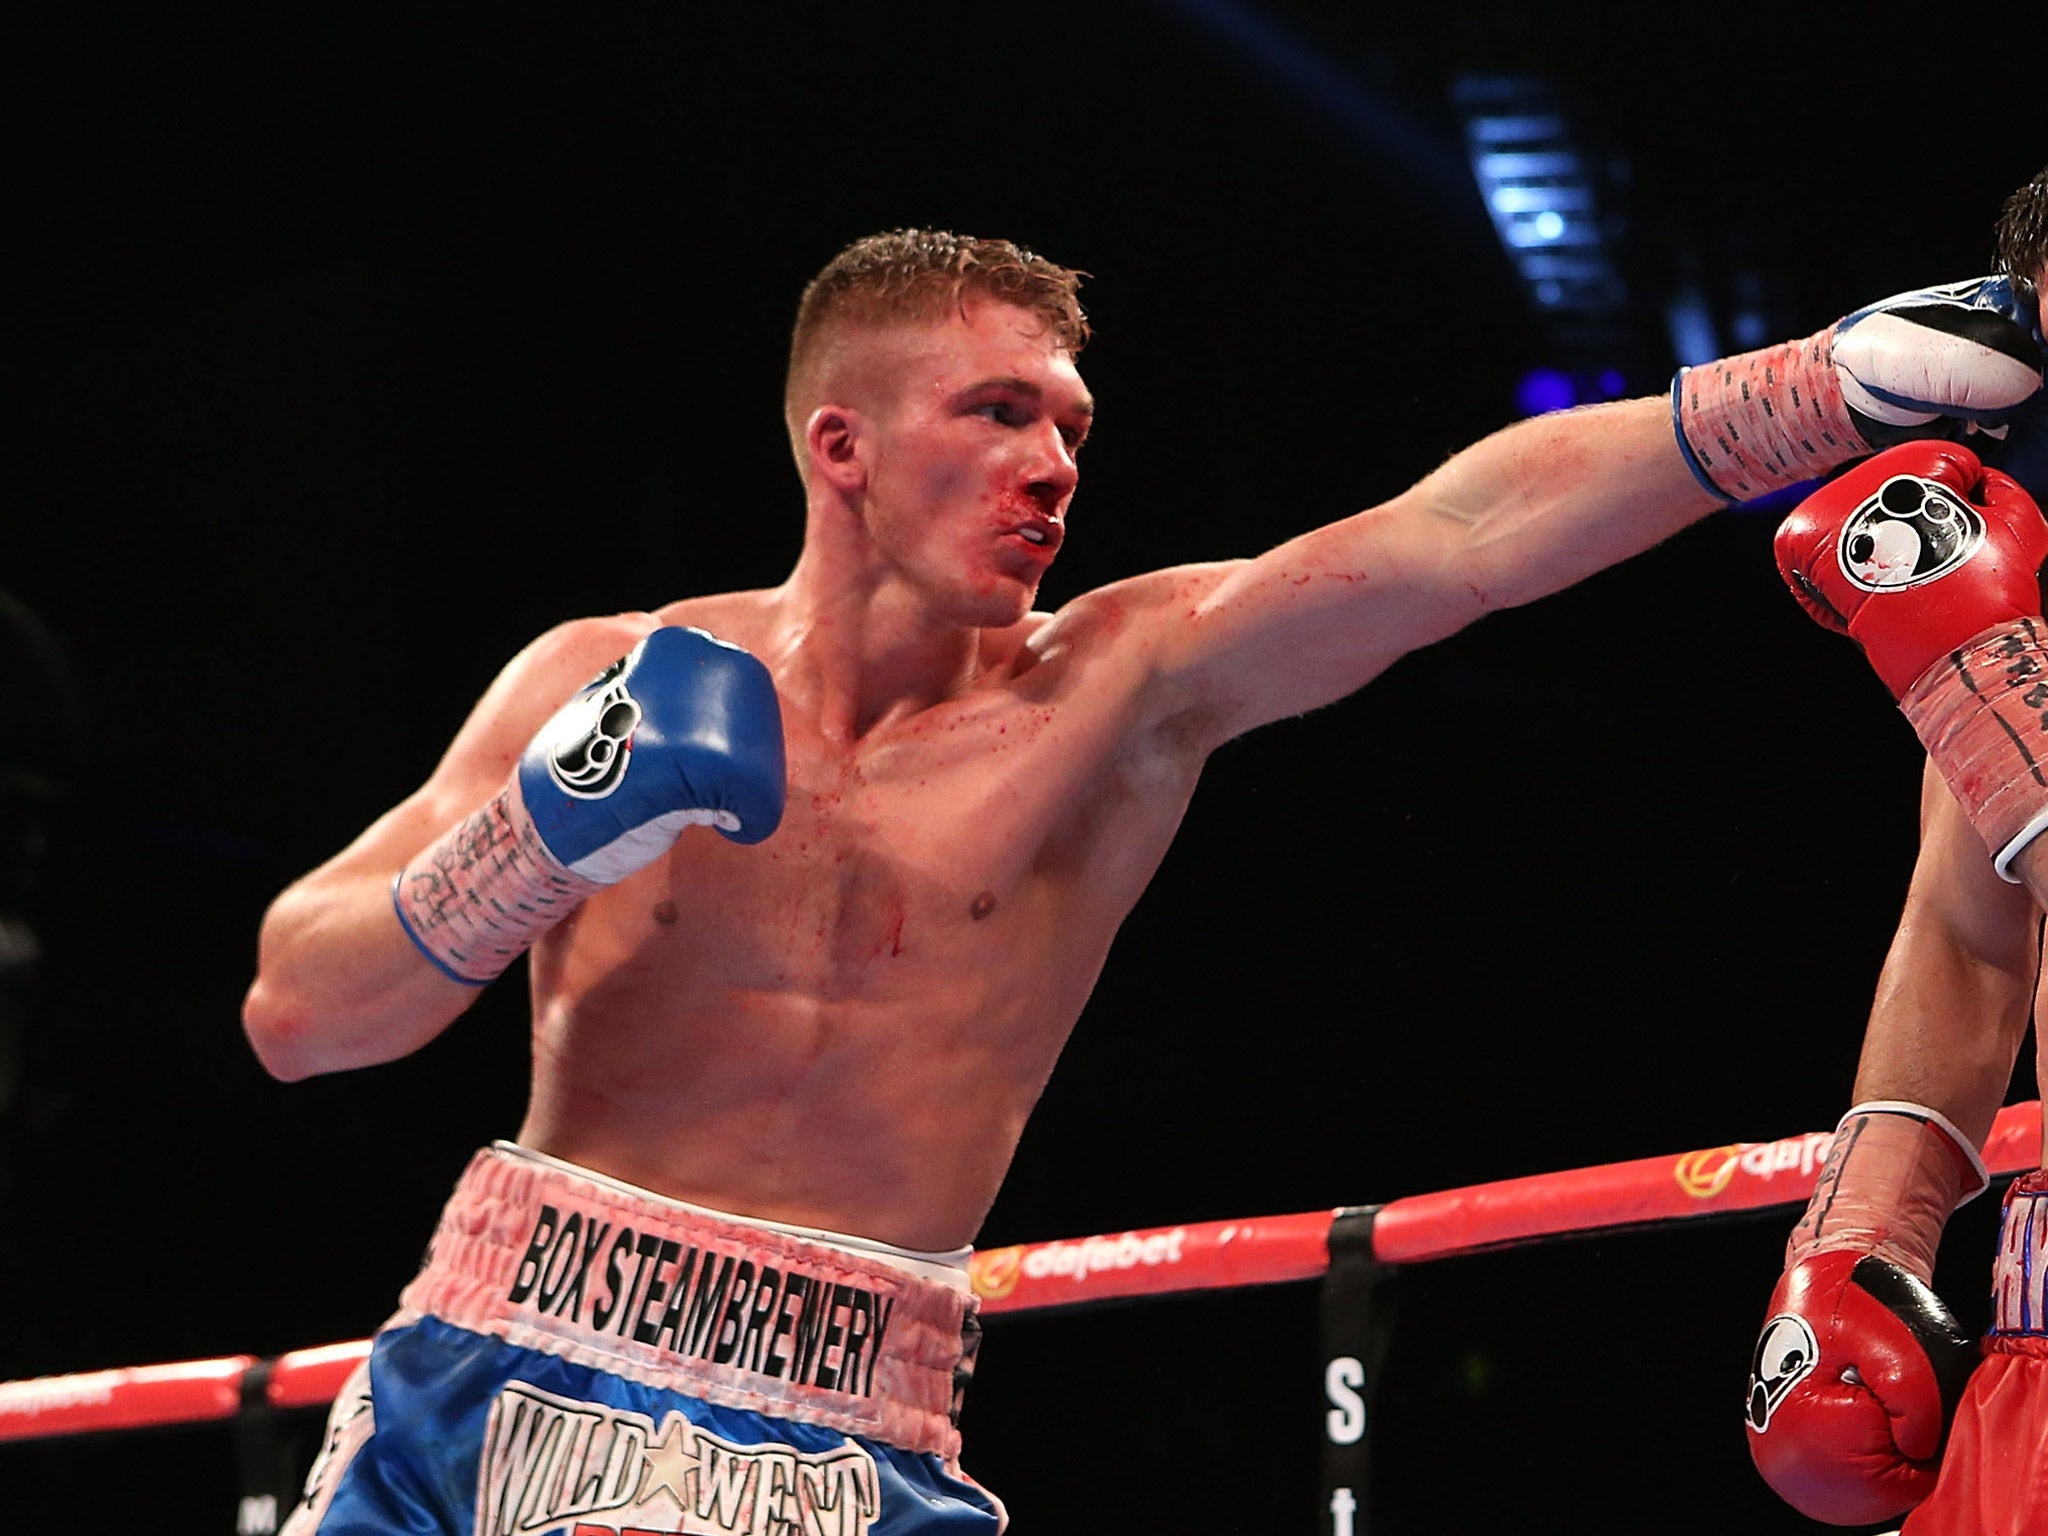 British boxer Nick Blackwell suffered a small bleed on the brain during his fight with Chris Eubank Jr